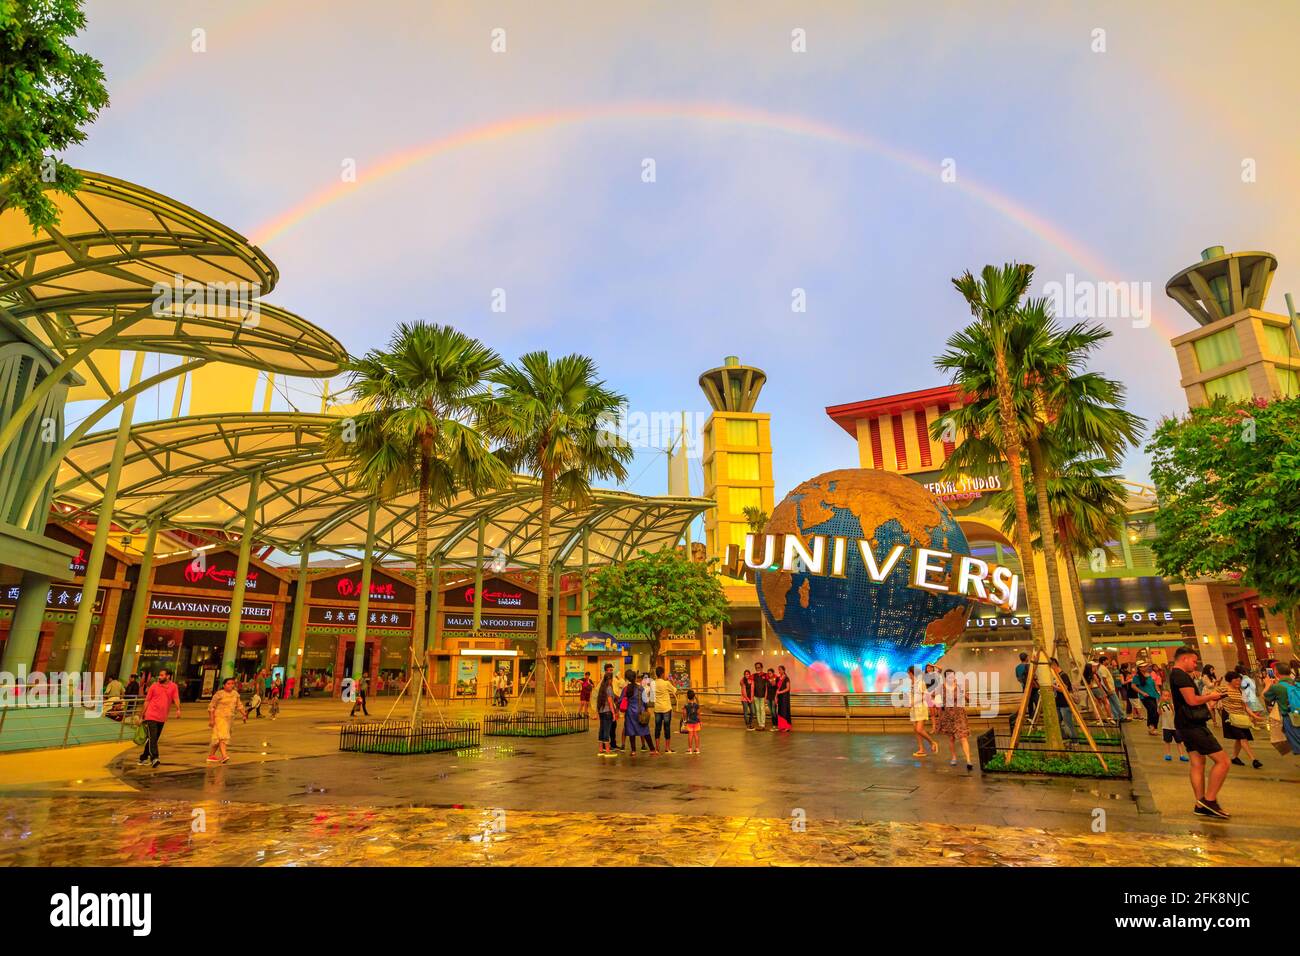 Singapore - May 2, 2018: rainbow after a thunderstorm in Sentosa at sunset. Universal Studios moving globe in Bull Ring square on background Stock Photo